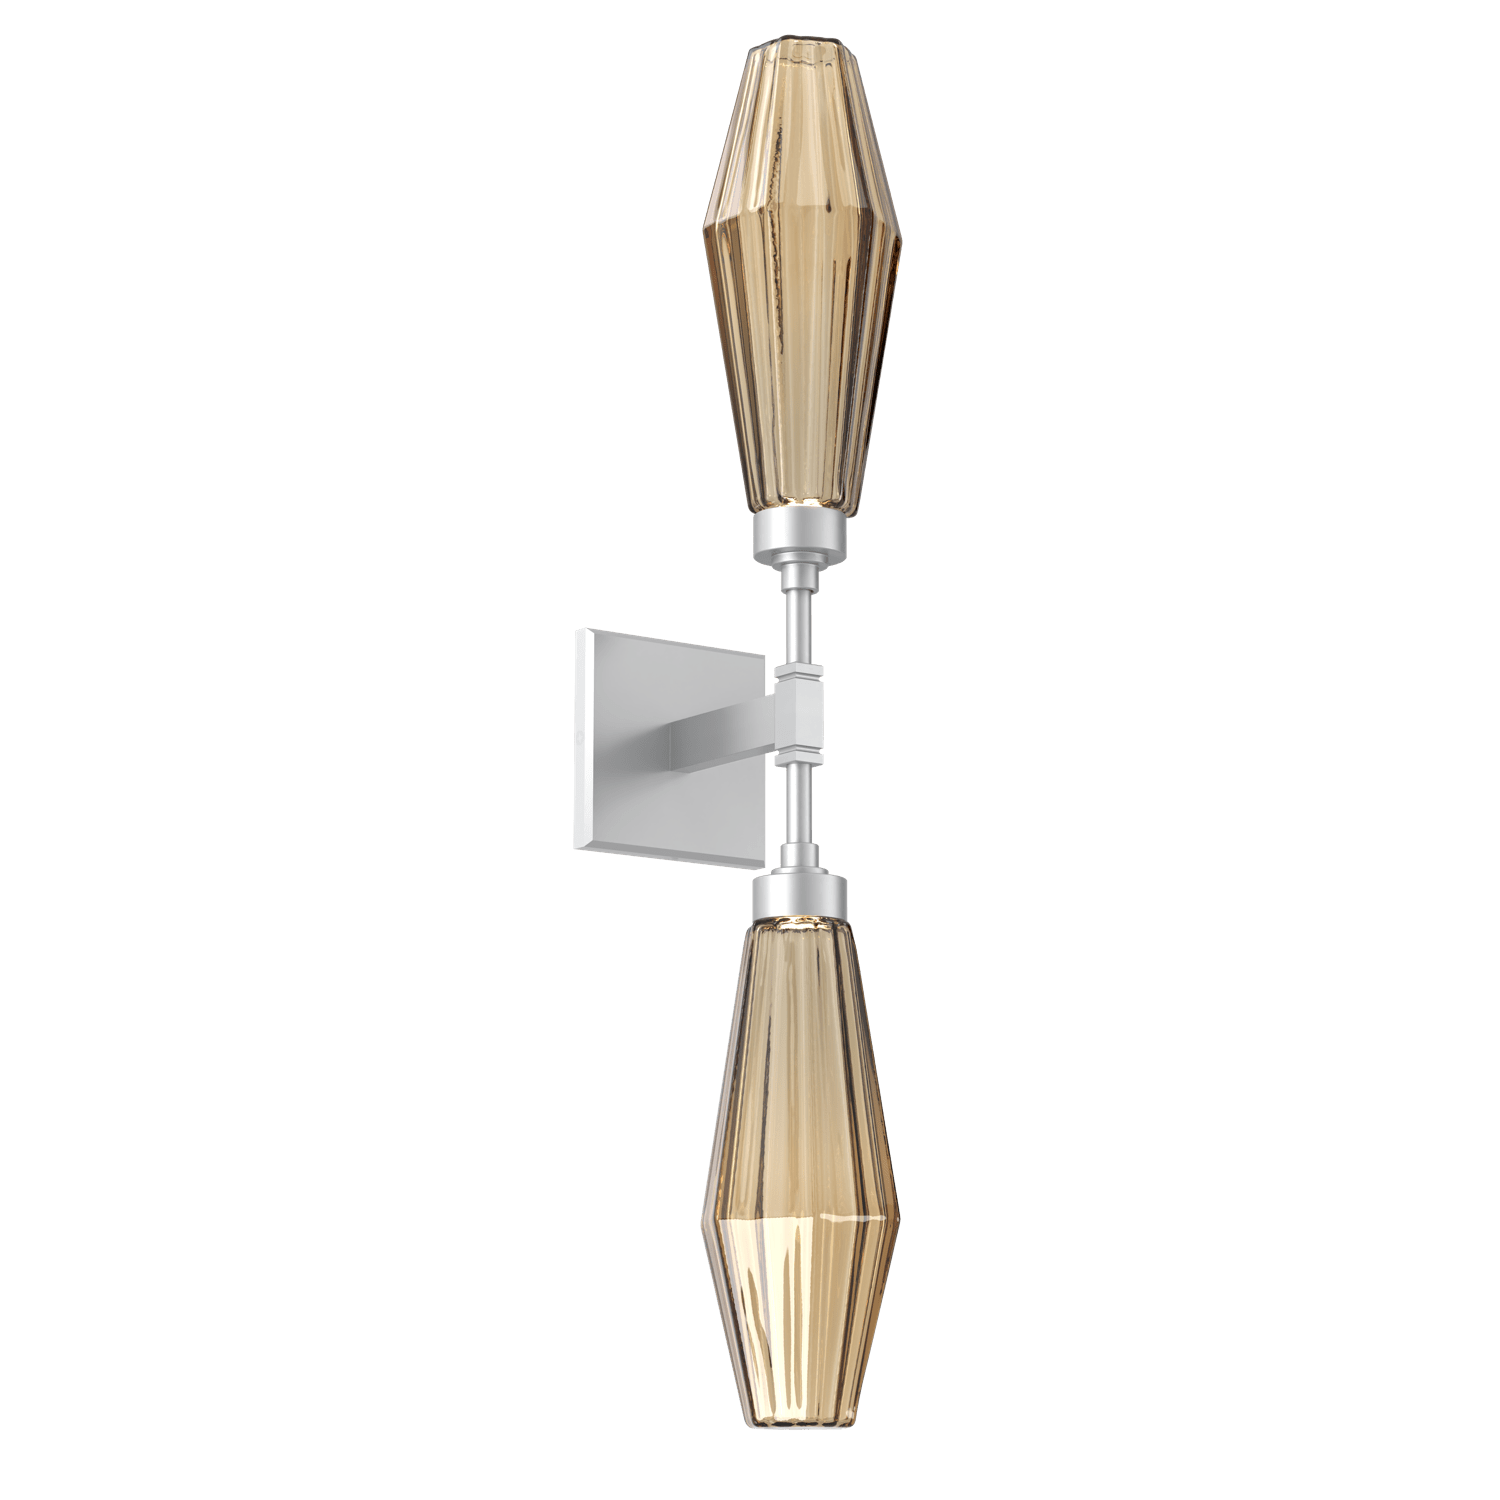 IDB0049-02-CS-RB-Hammerton-Studio-Aalto-double-wall-sconce-with-classic-silver-finish-and-optic-ribbed-bronze-glass-shades-and-LED-lamping